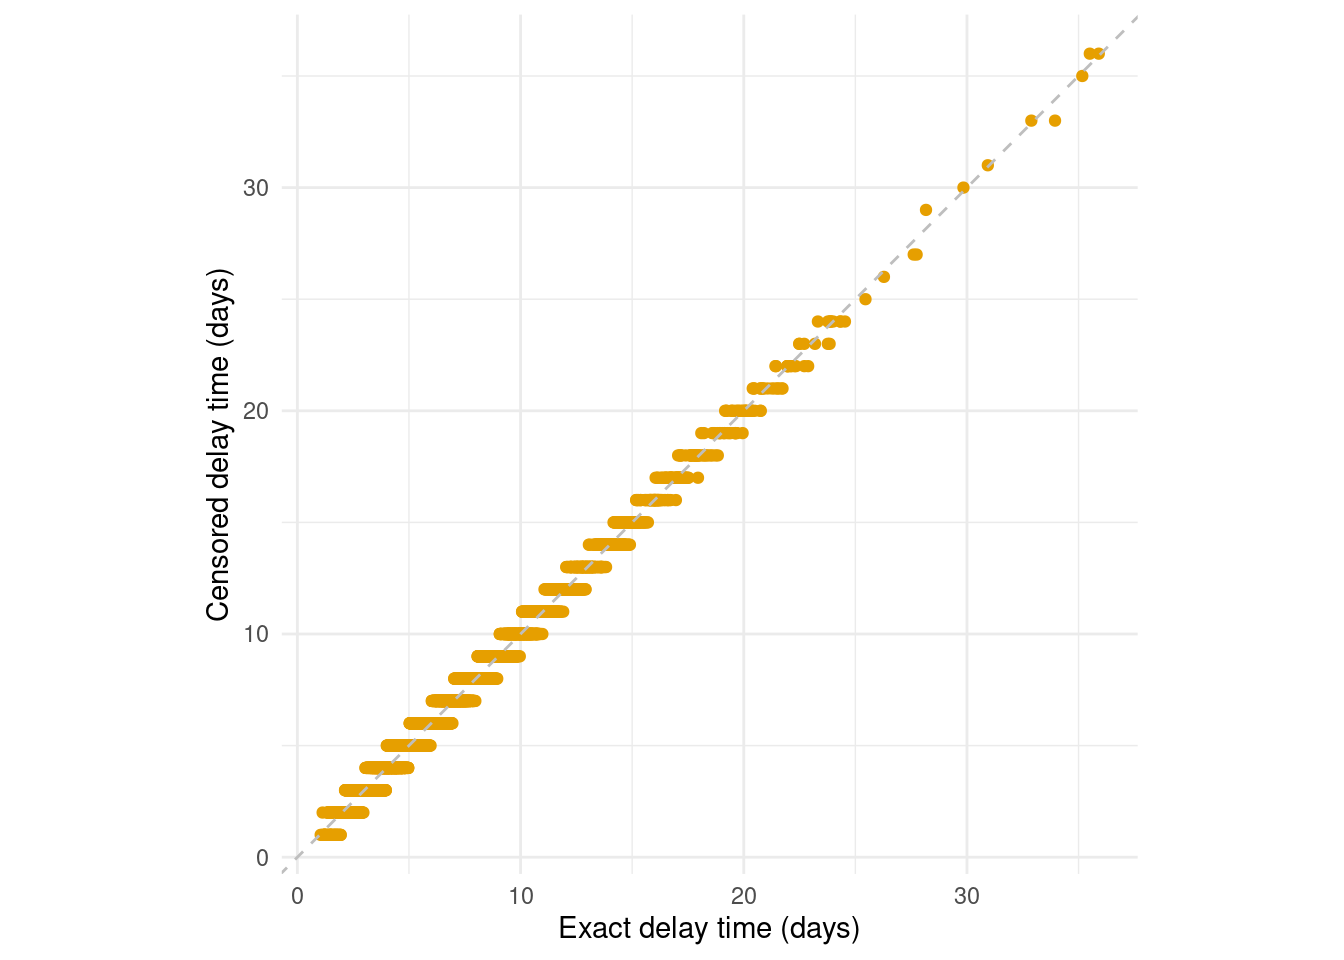 Interval censoring of the primary and secondary event times obscures the delay times. A common example of this is when events are reported as daily aggregates. While daily censoring is most common, epidist supports the primary and secondary events having other delay intervals.